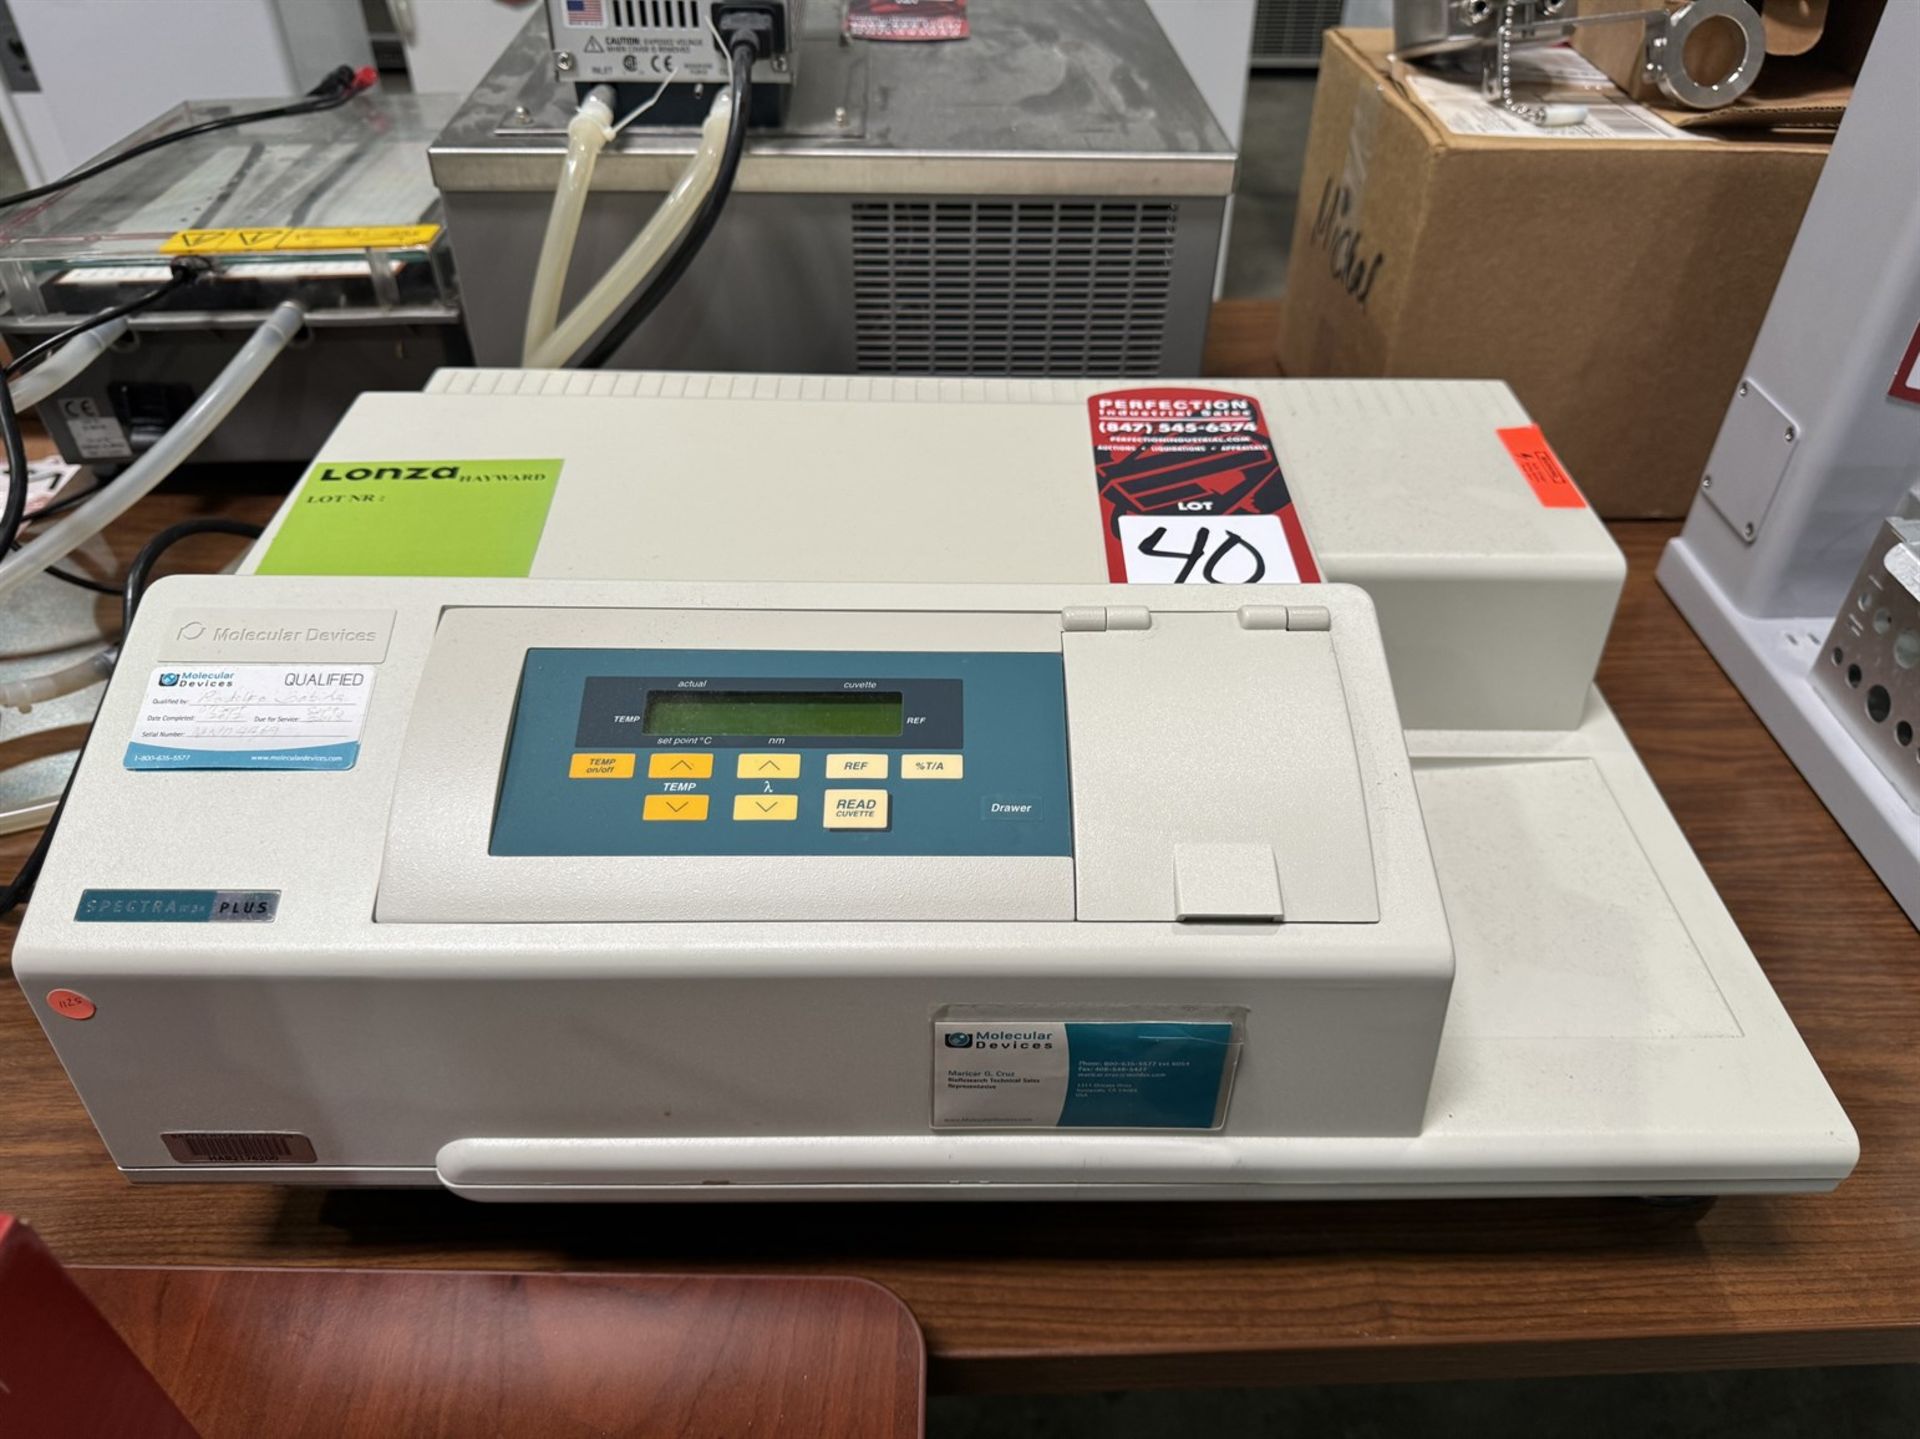 MOLECULAR DEVICES Spectra Max 384 Plus Microplate Spectrophotometer, s/n MN04469 - Image 2 of 4